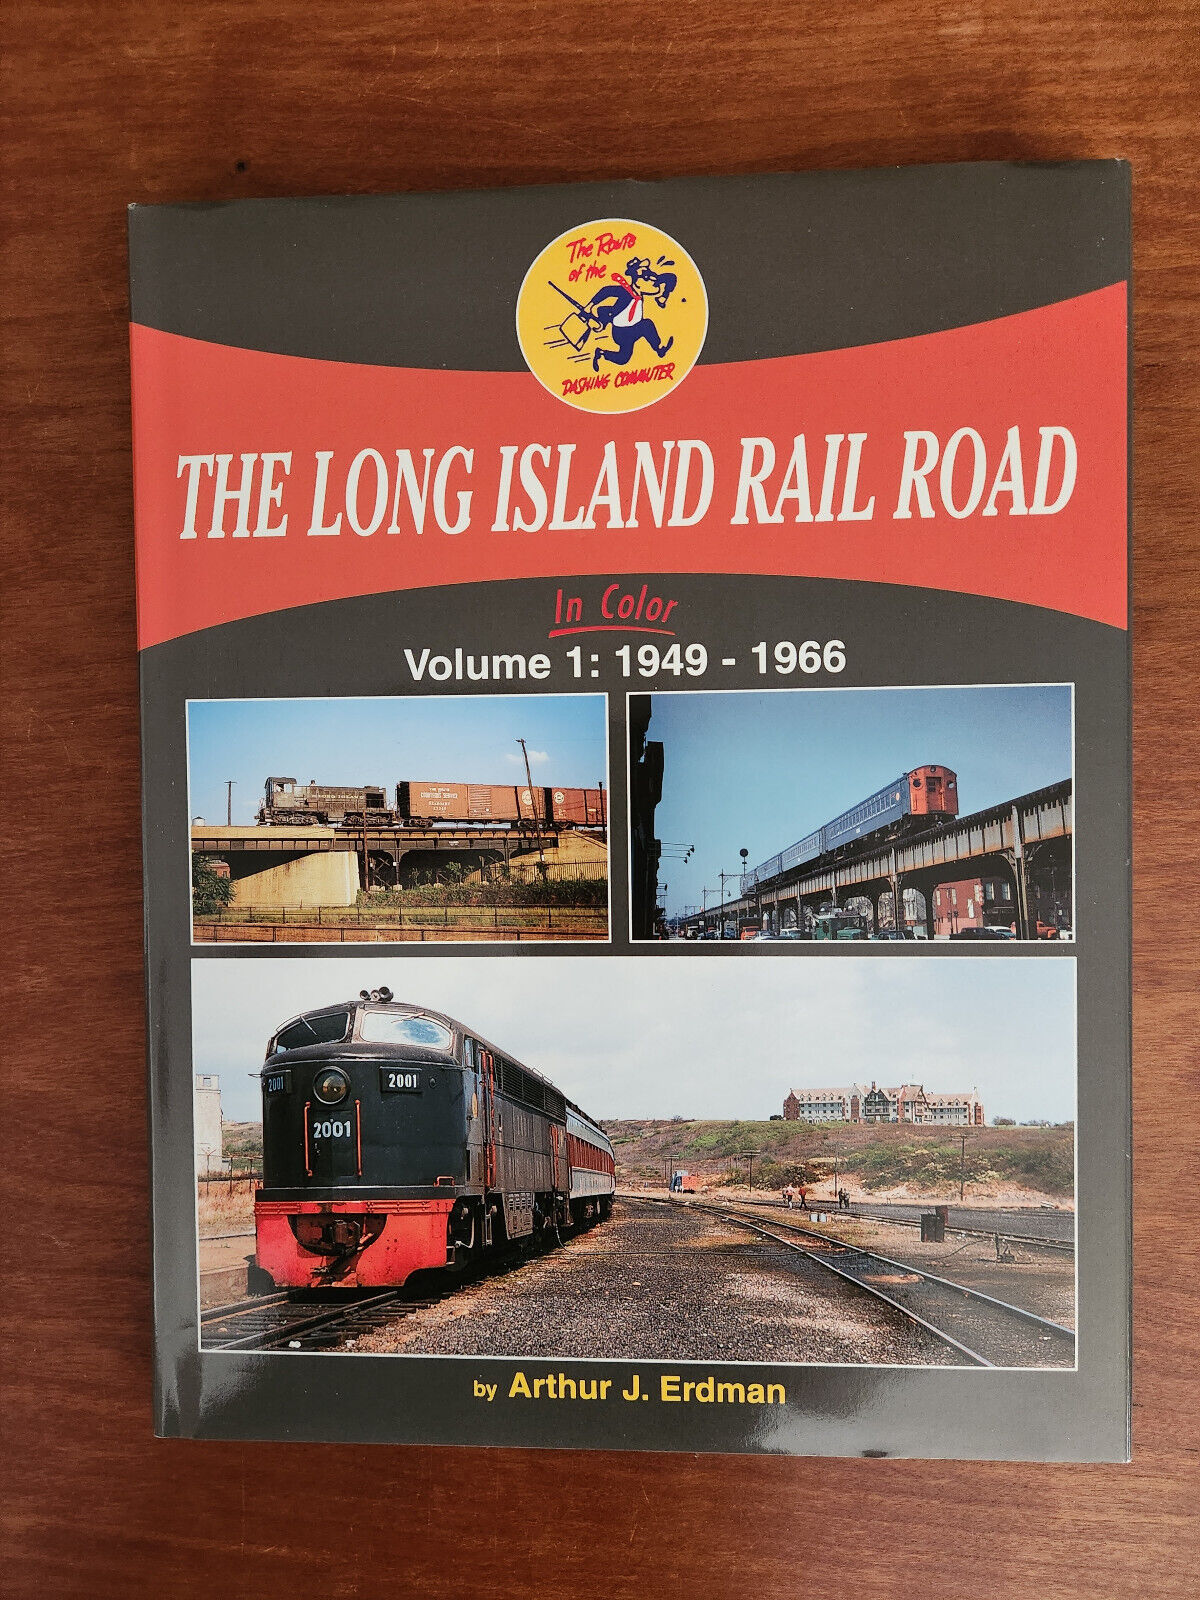 The Long Island Railroad in color. 5 volume set. Hardcover, very good condition